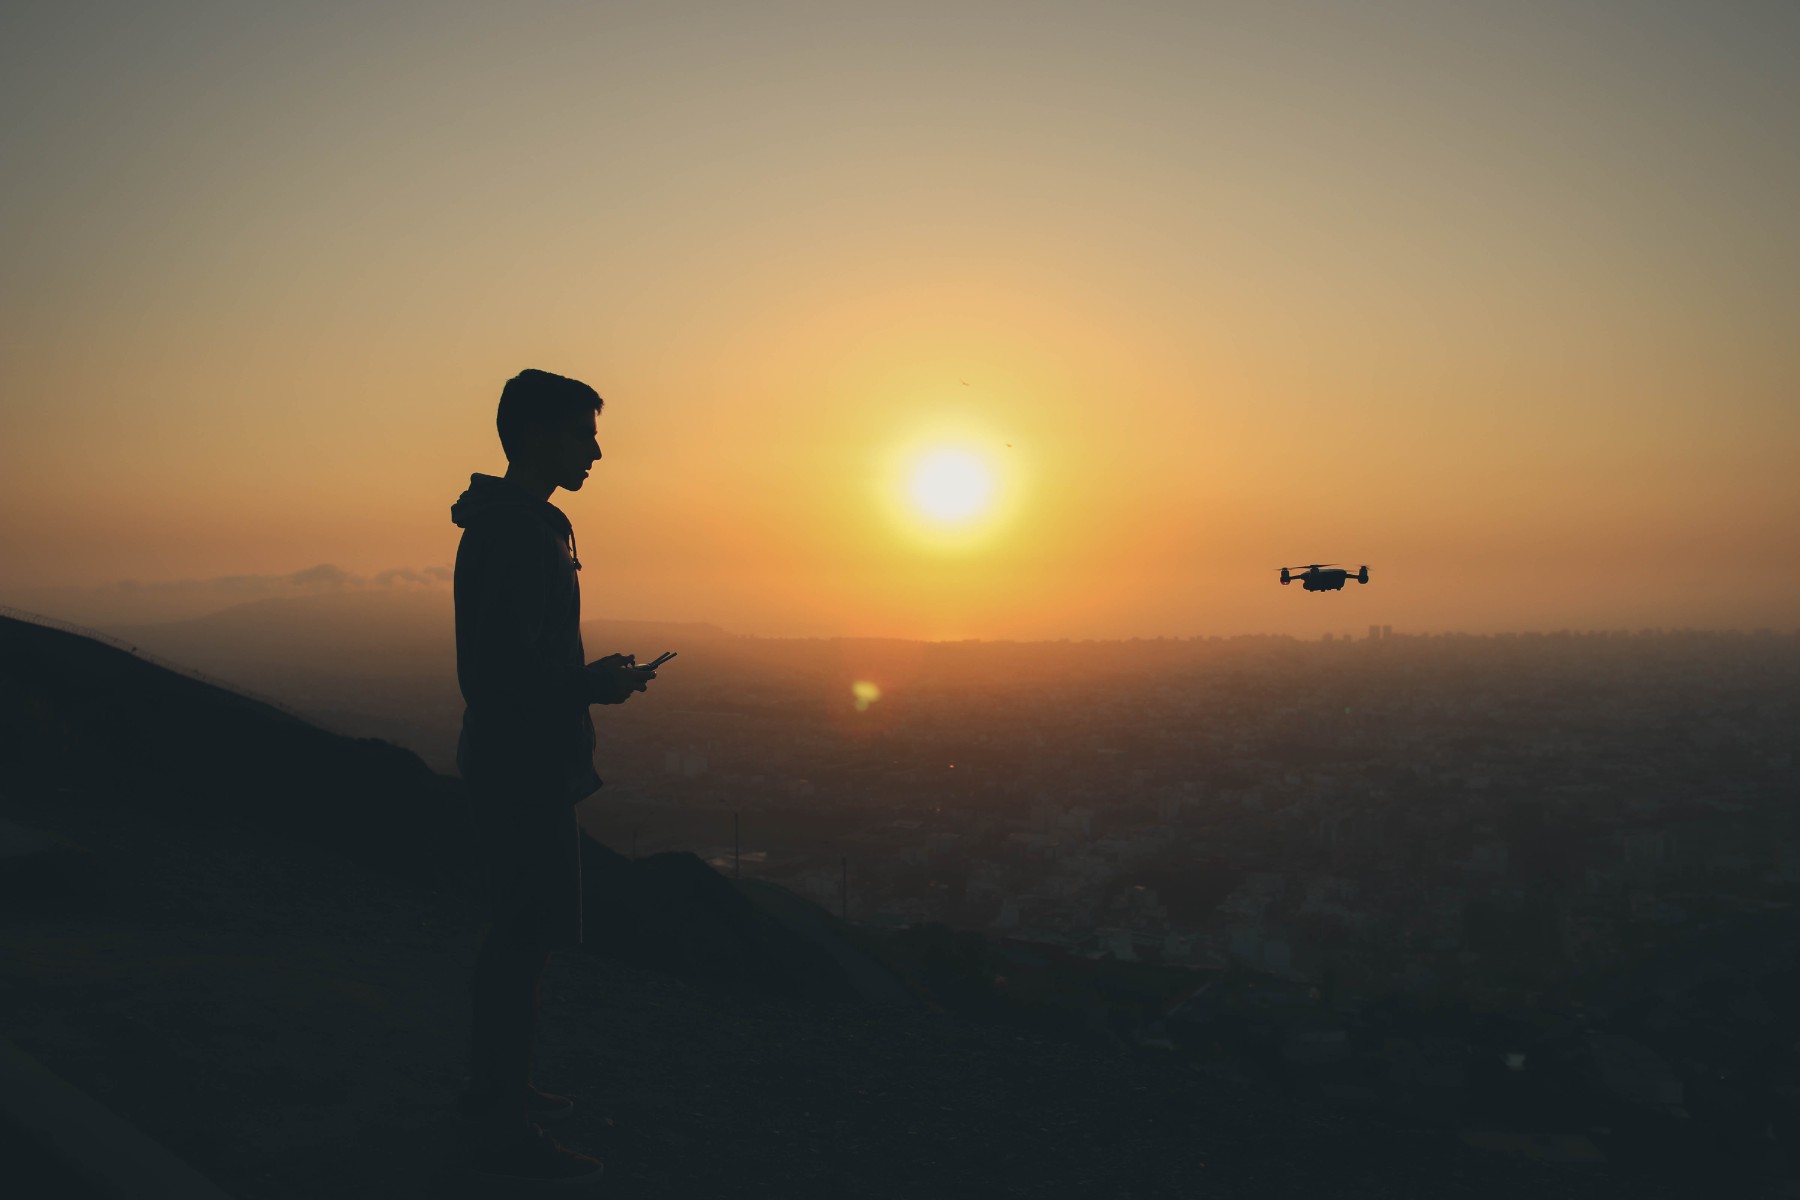 Man flying drone at sunset